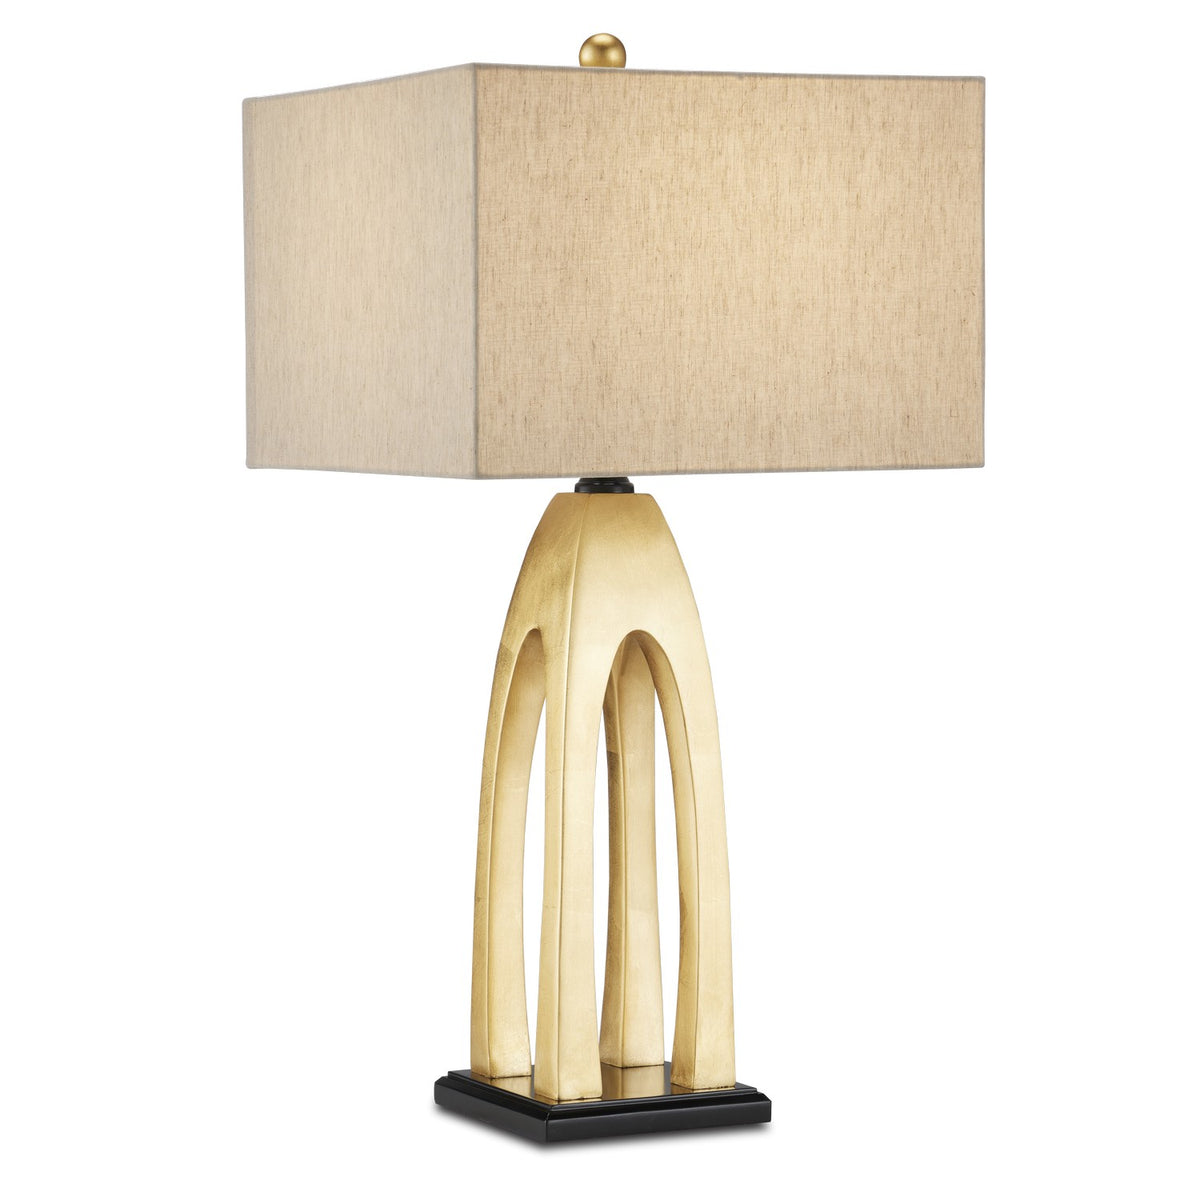 Currey and Company One Light Table Lamp from the Archway collection in Contemporary Gold Leaf/Black finish